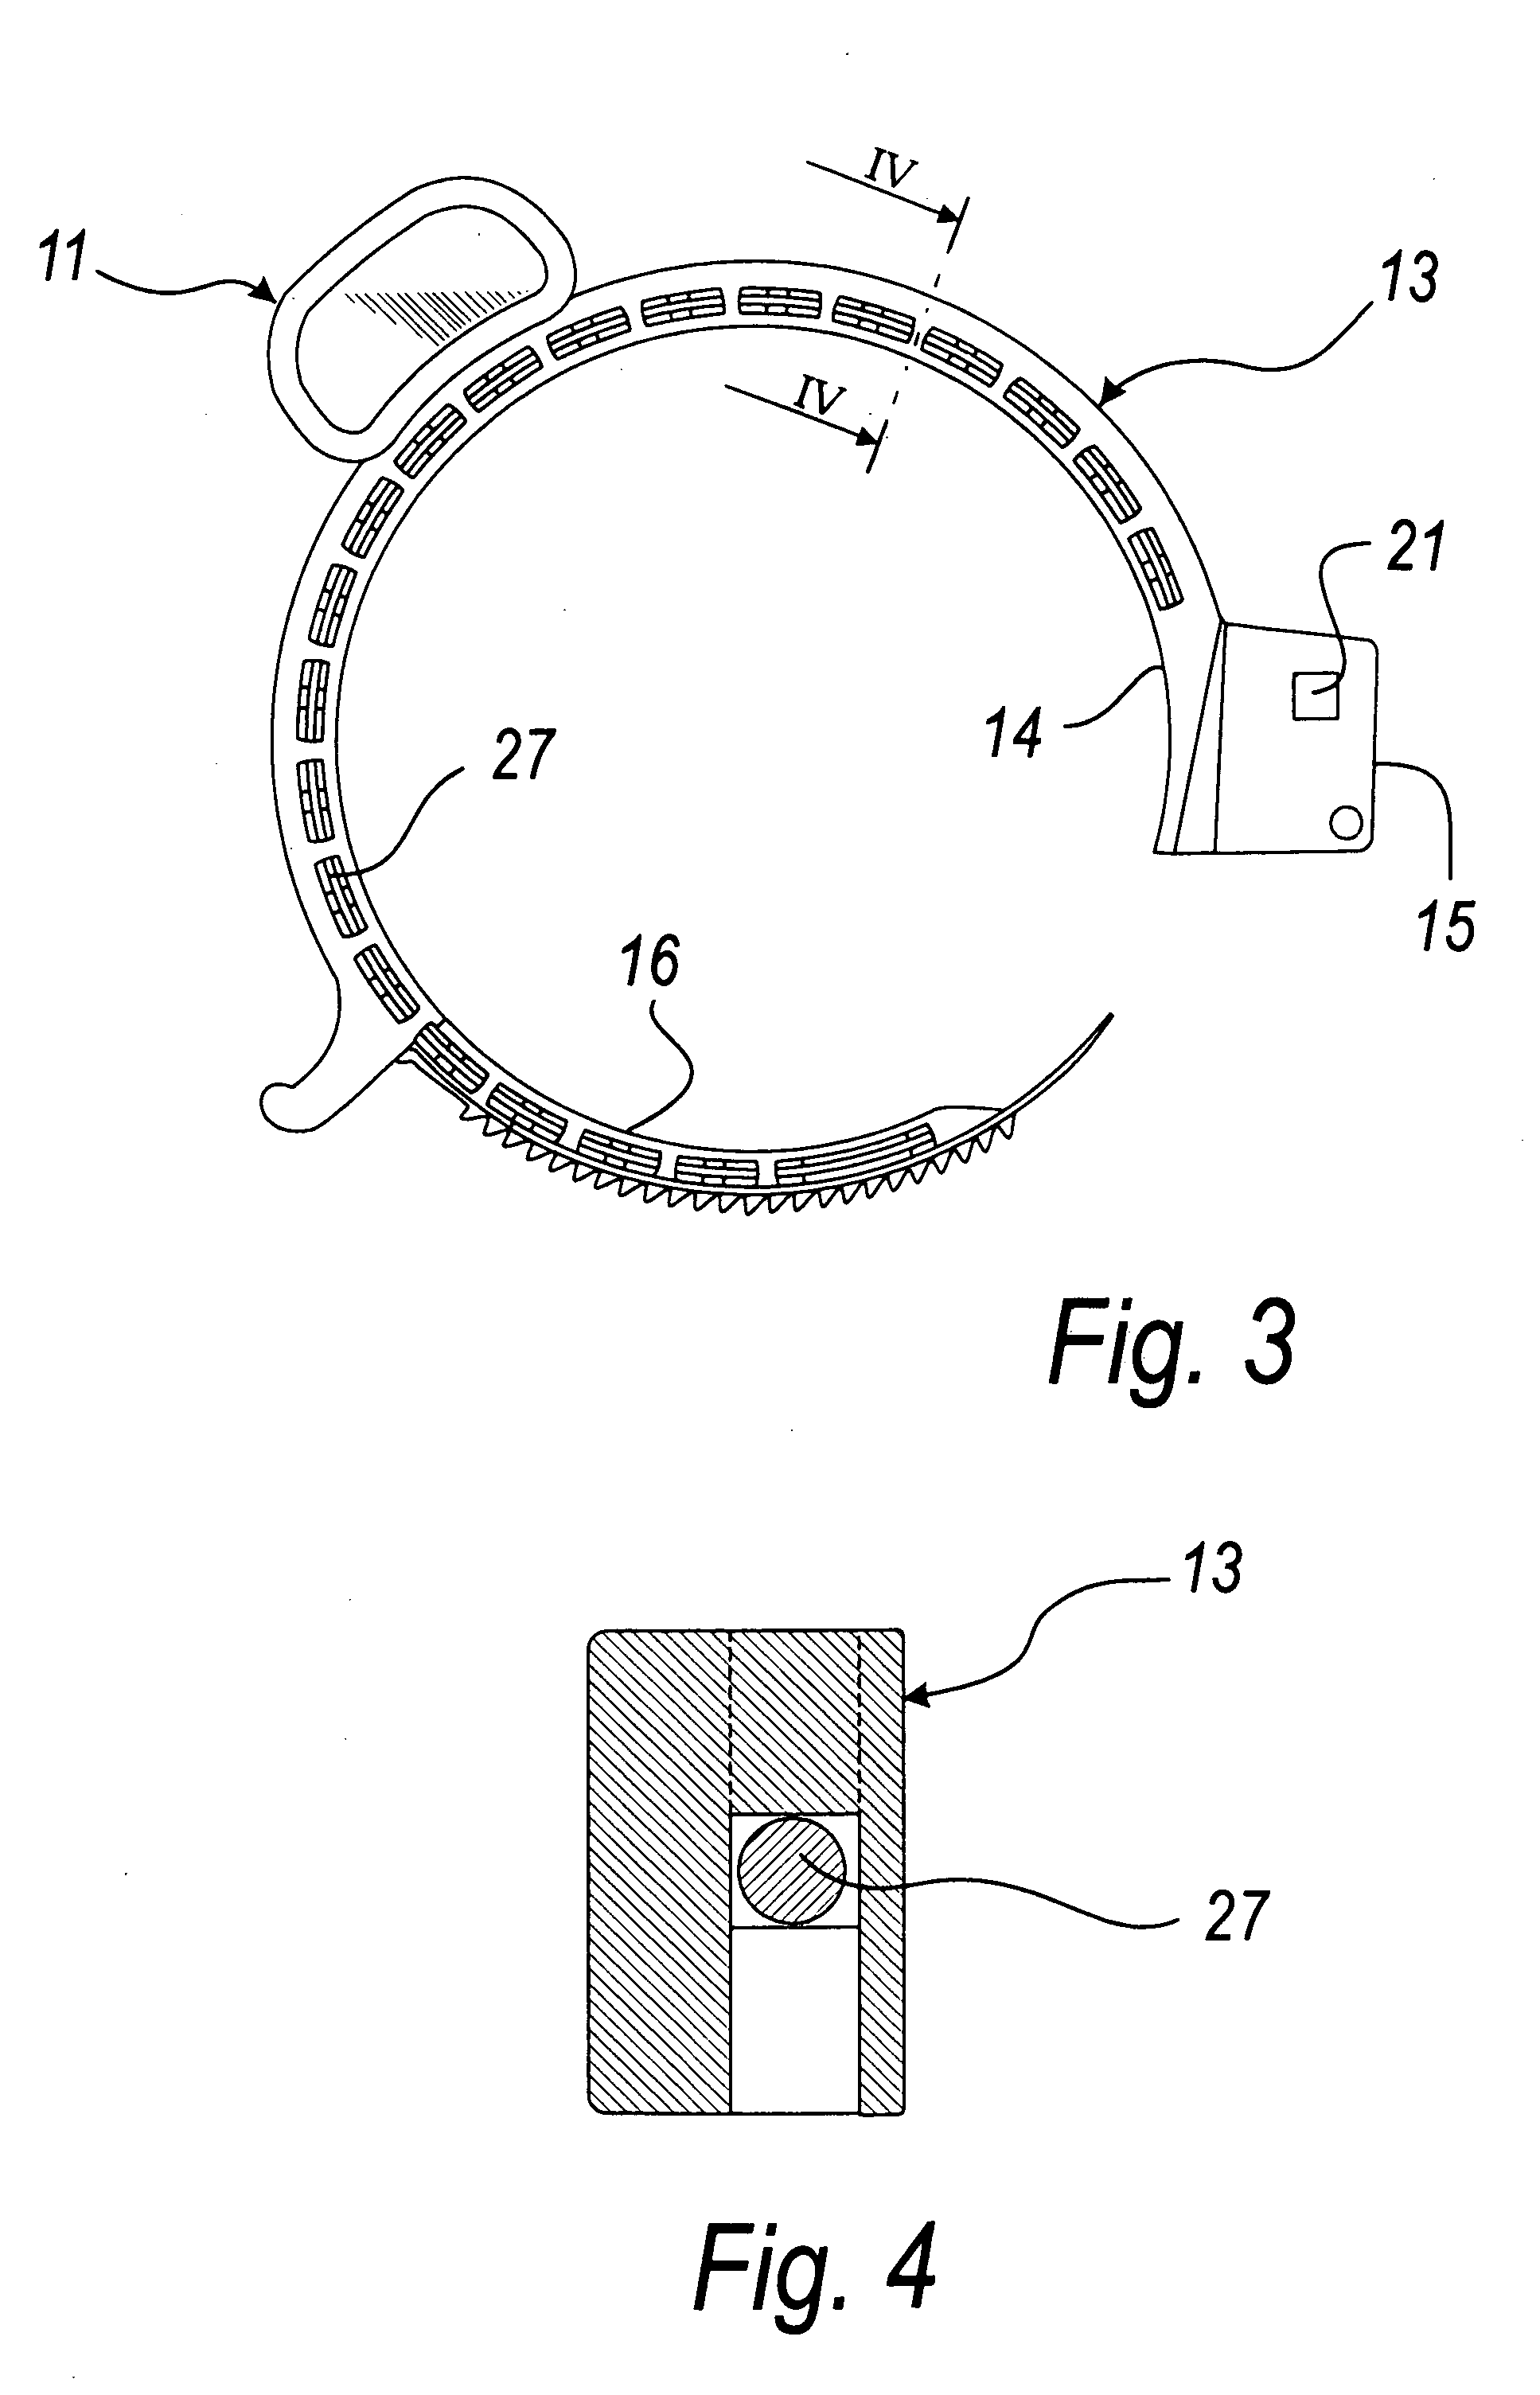 Anti-theft device for items having portions that can be surrounded by straps or the like